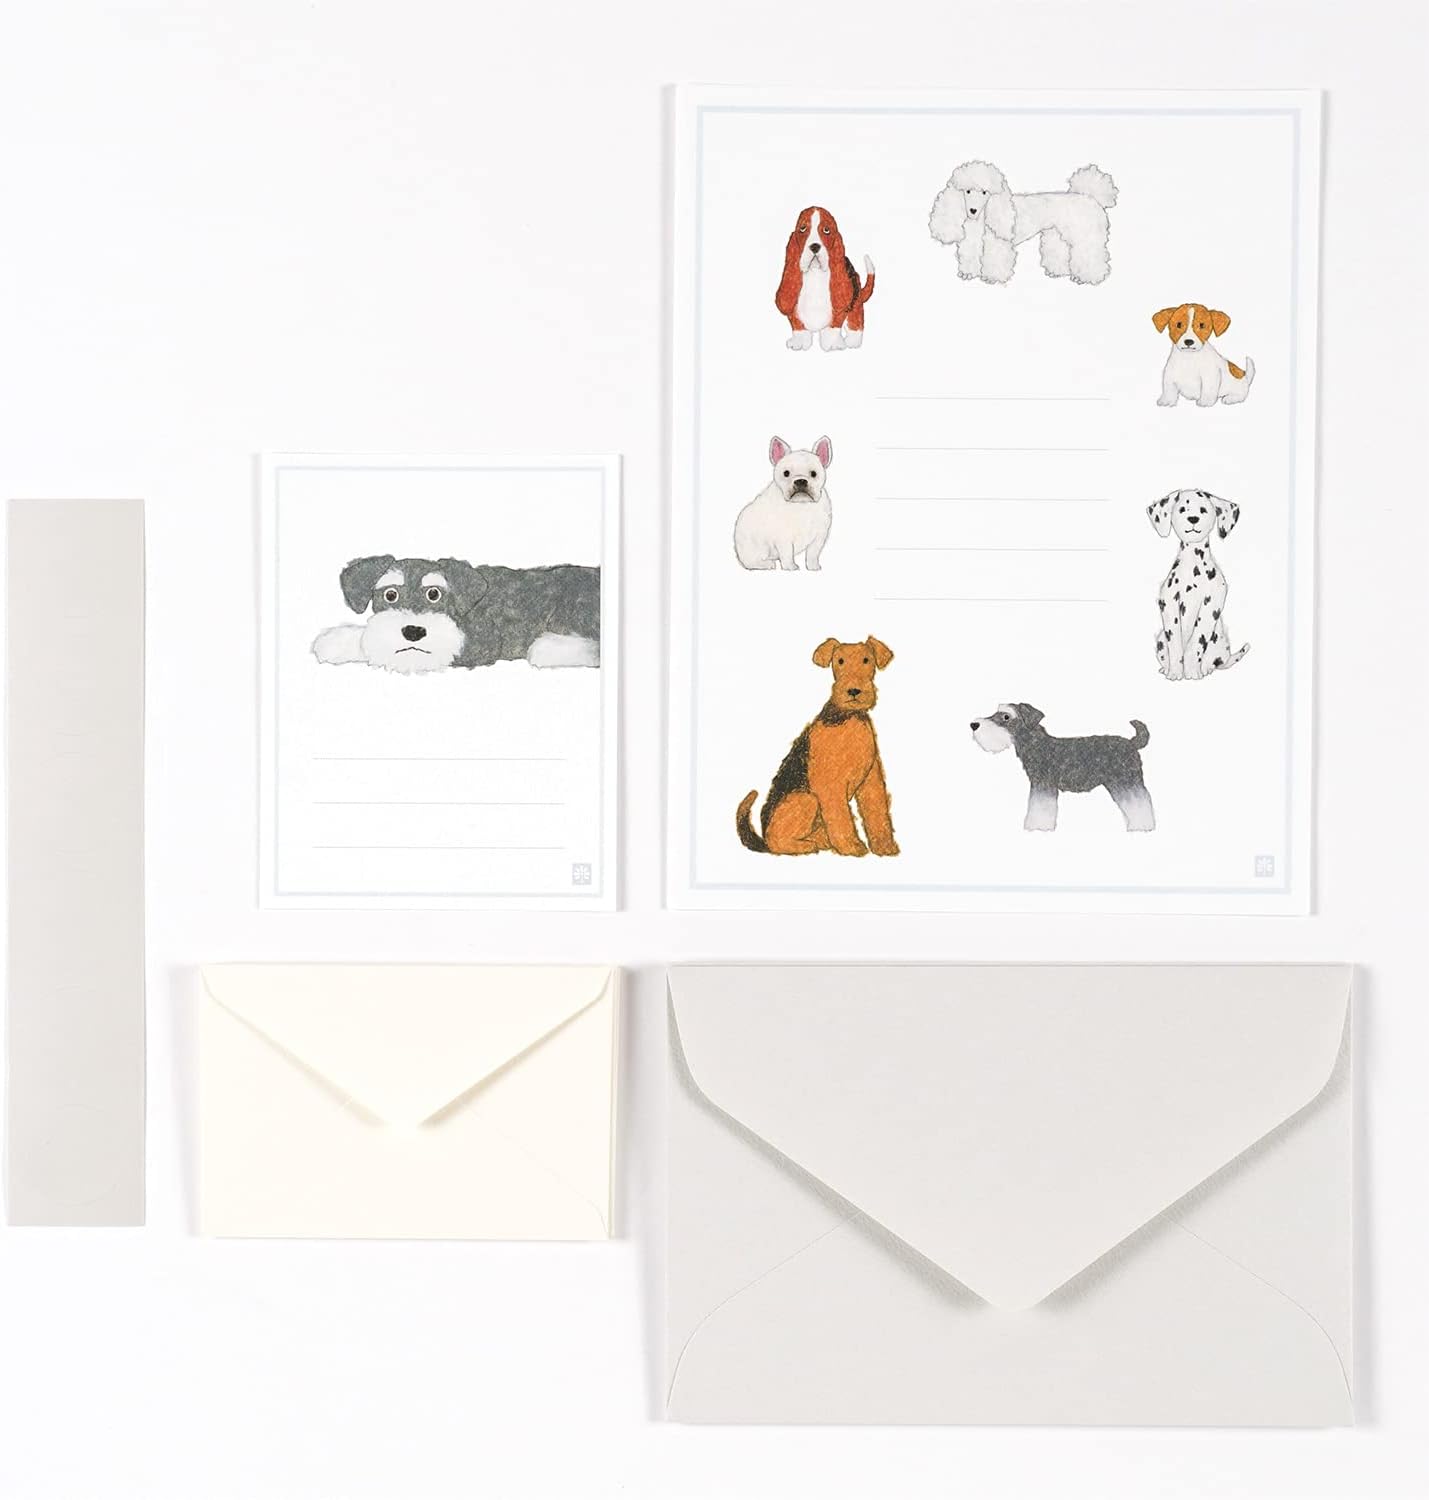 Dogs letter writing set lined paper illustrations different dog breeds stationery australia